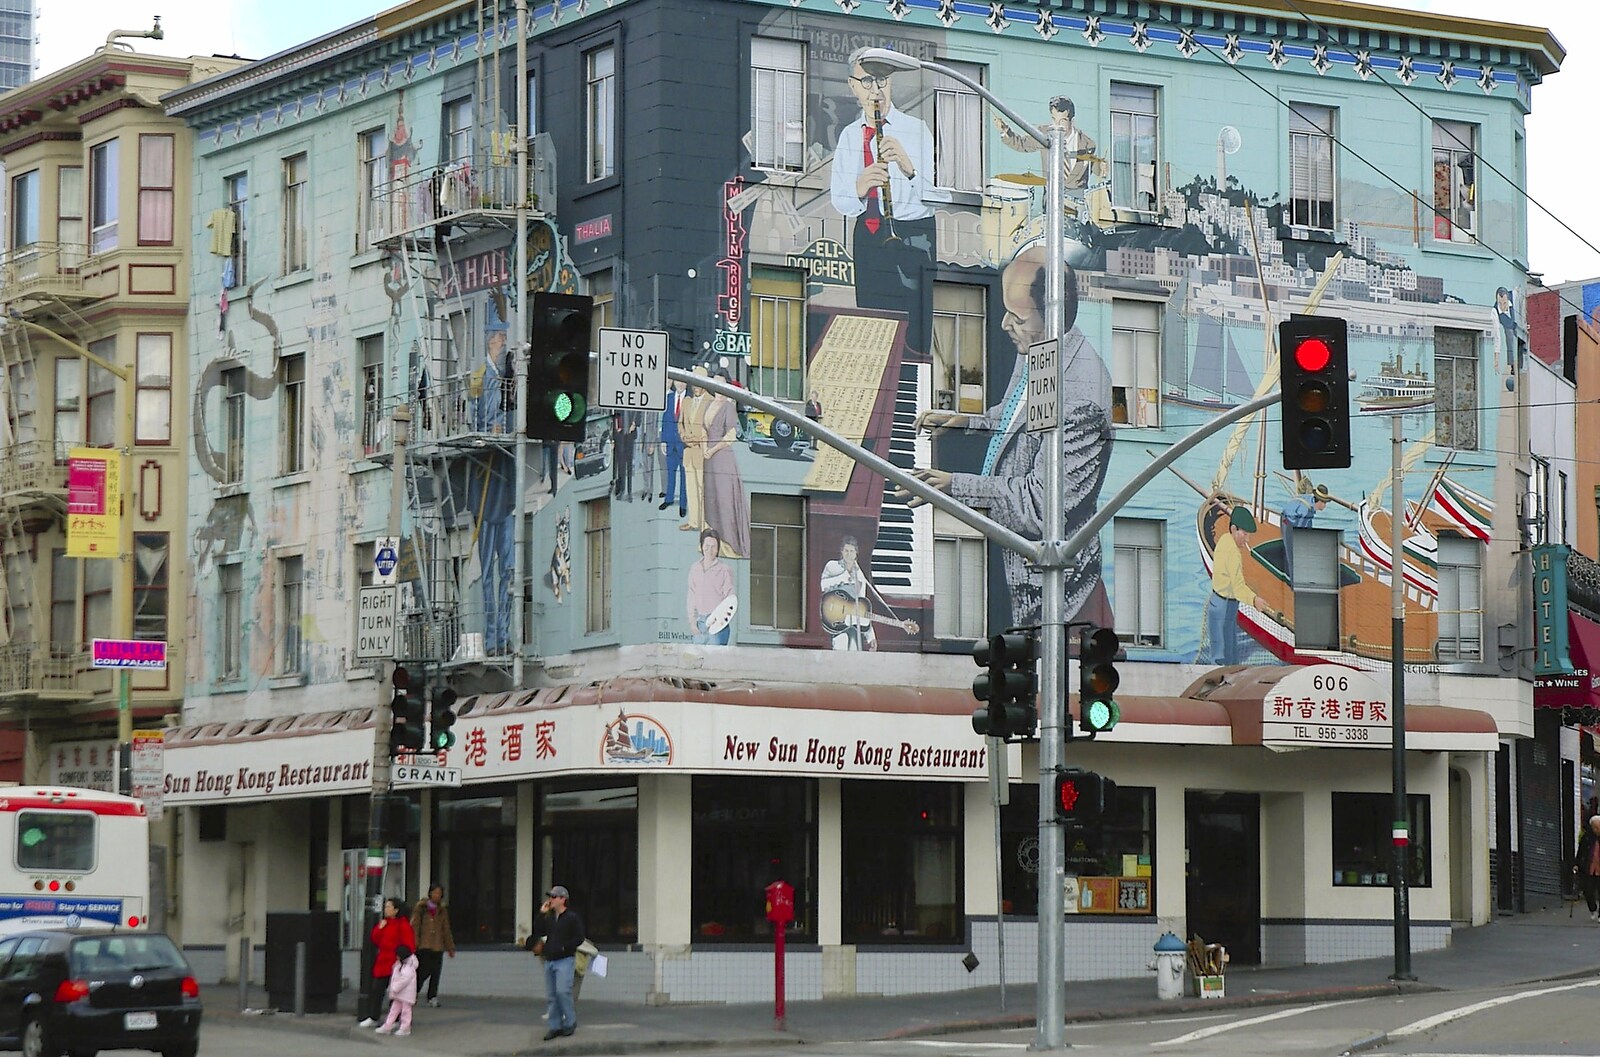 Building murals seem to be popular from Chinatown, Telegraph Hill and Fisherman's Wharf, San Francisco, California, US - 11th March 2006